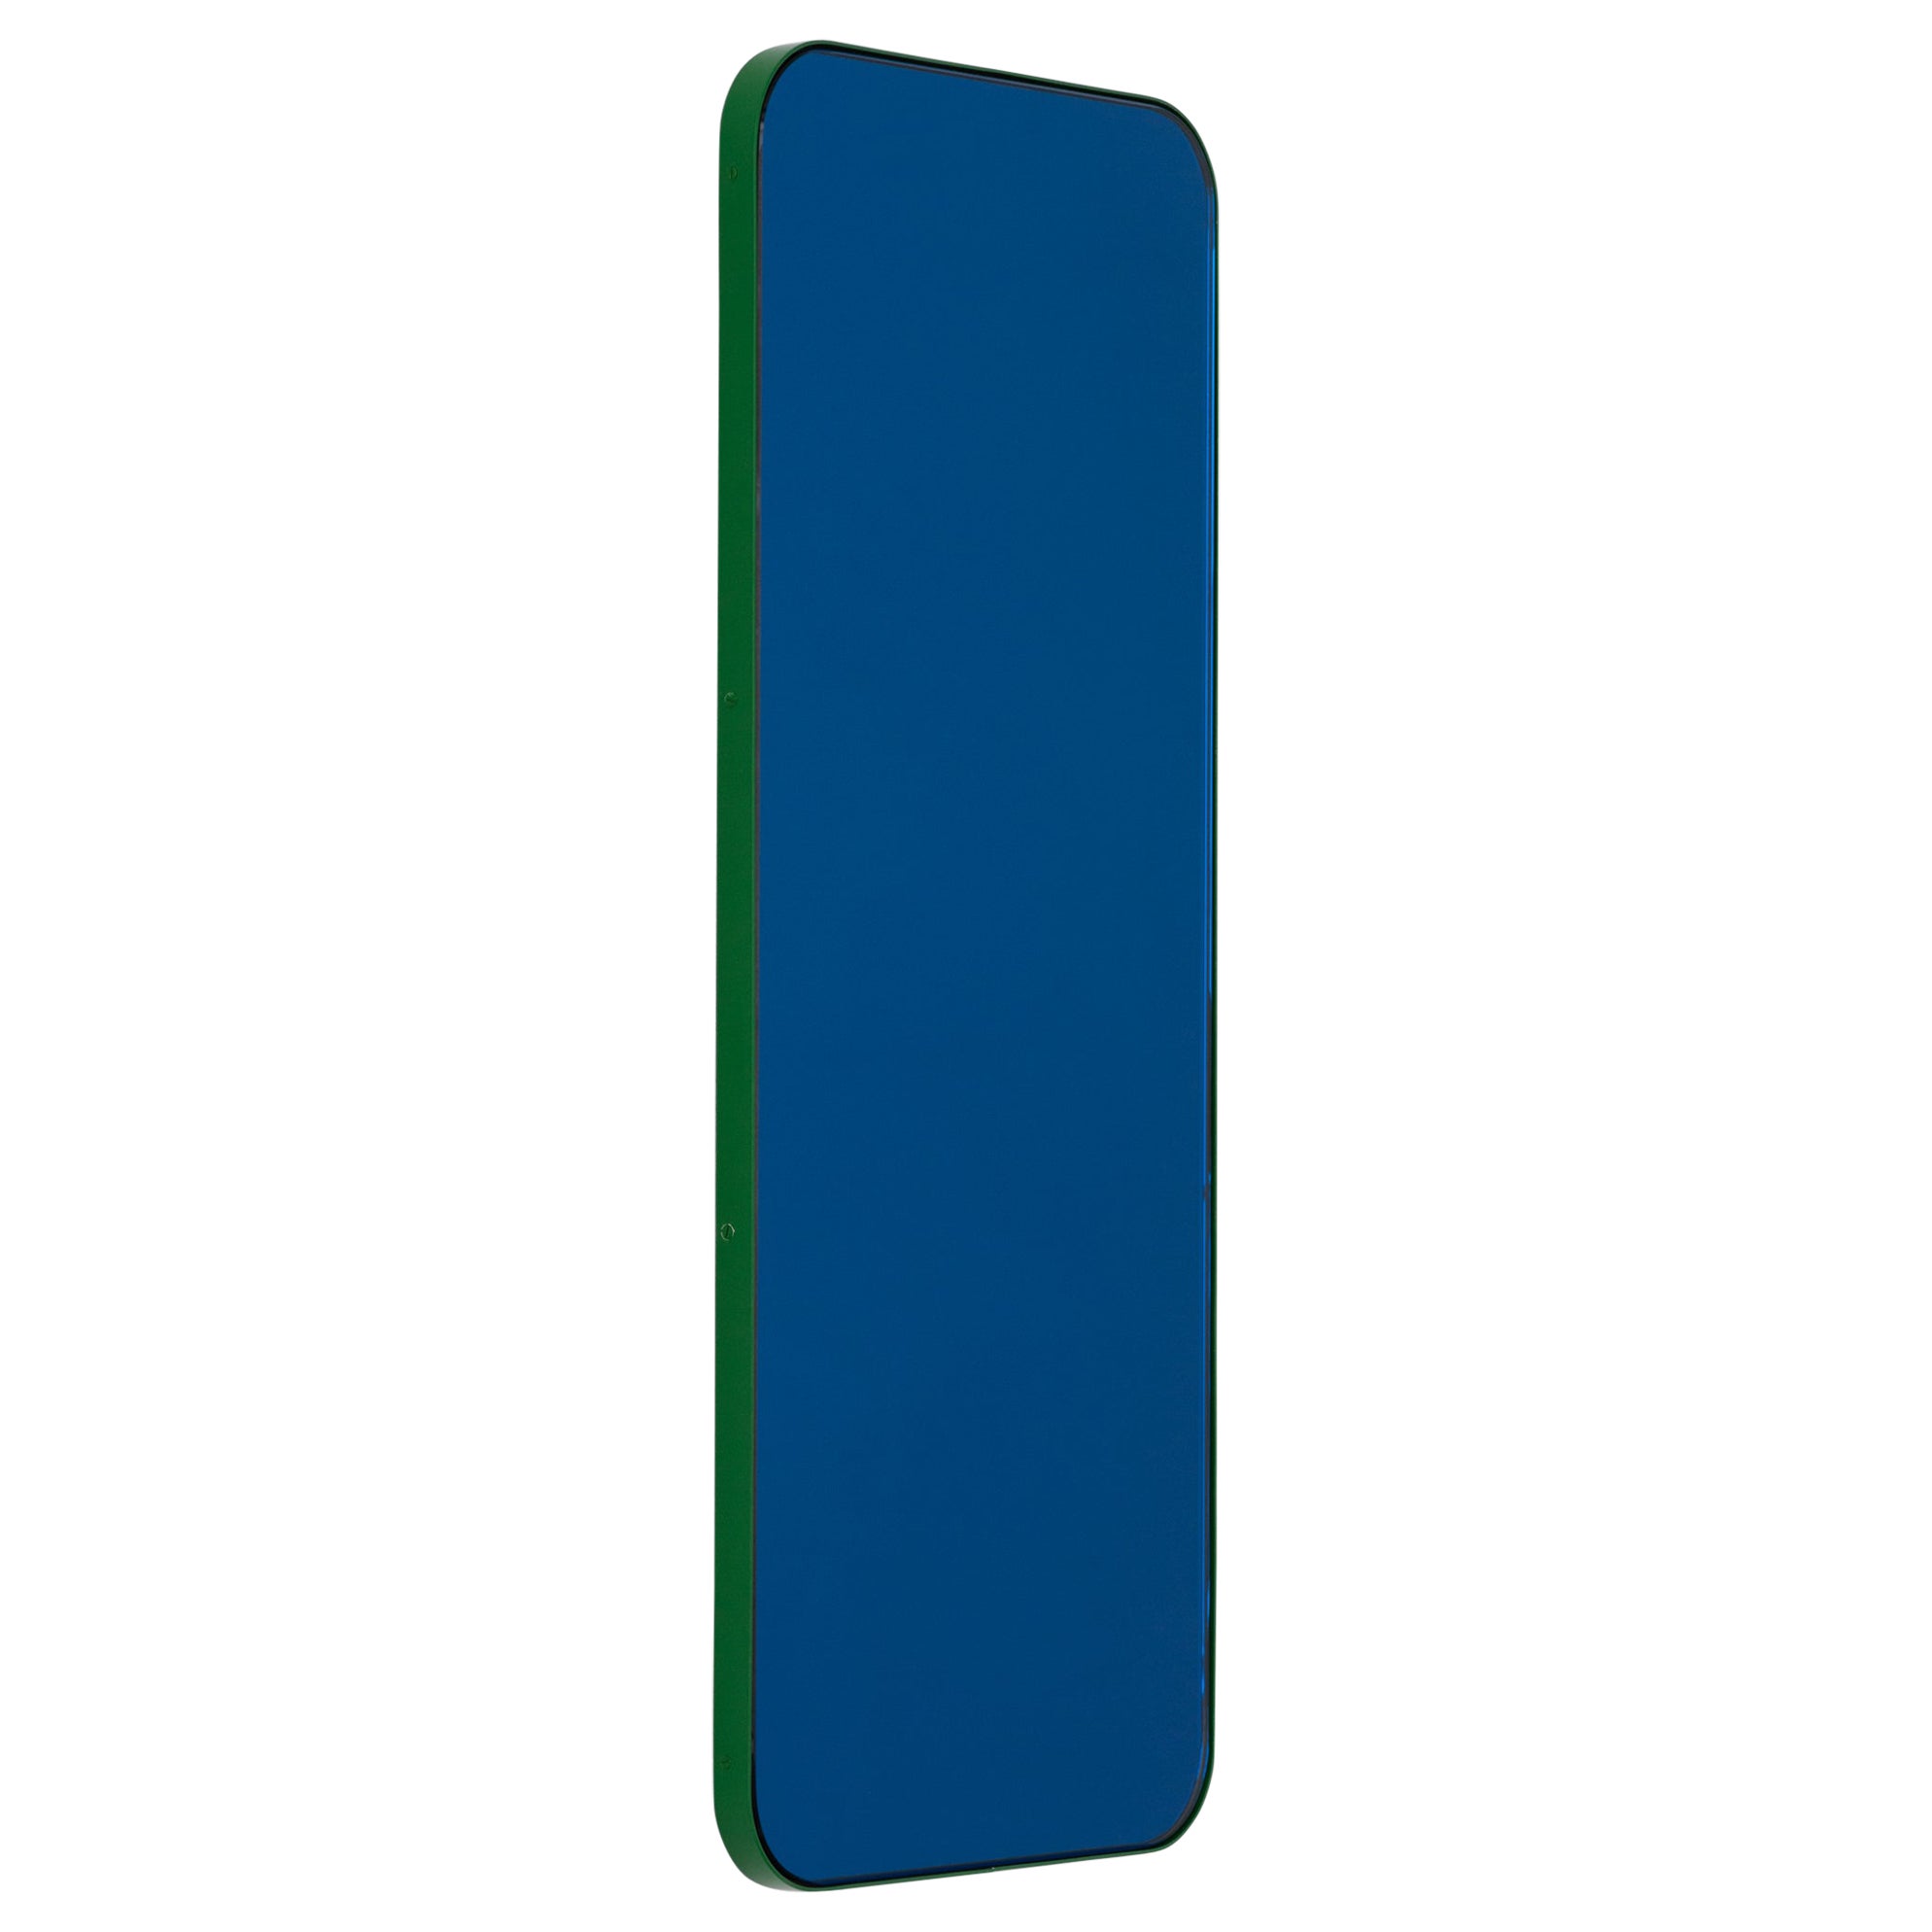 Quadris Rectangular Modern Blue Mirror with a Green Frame, Small For Sale